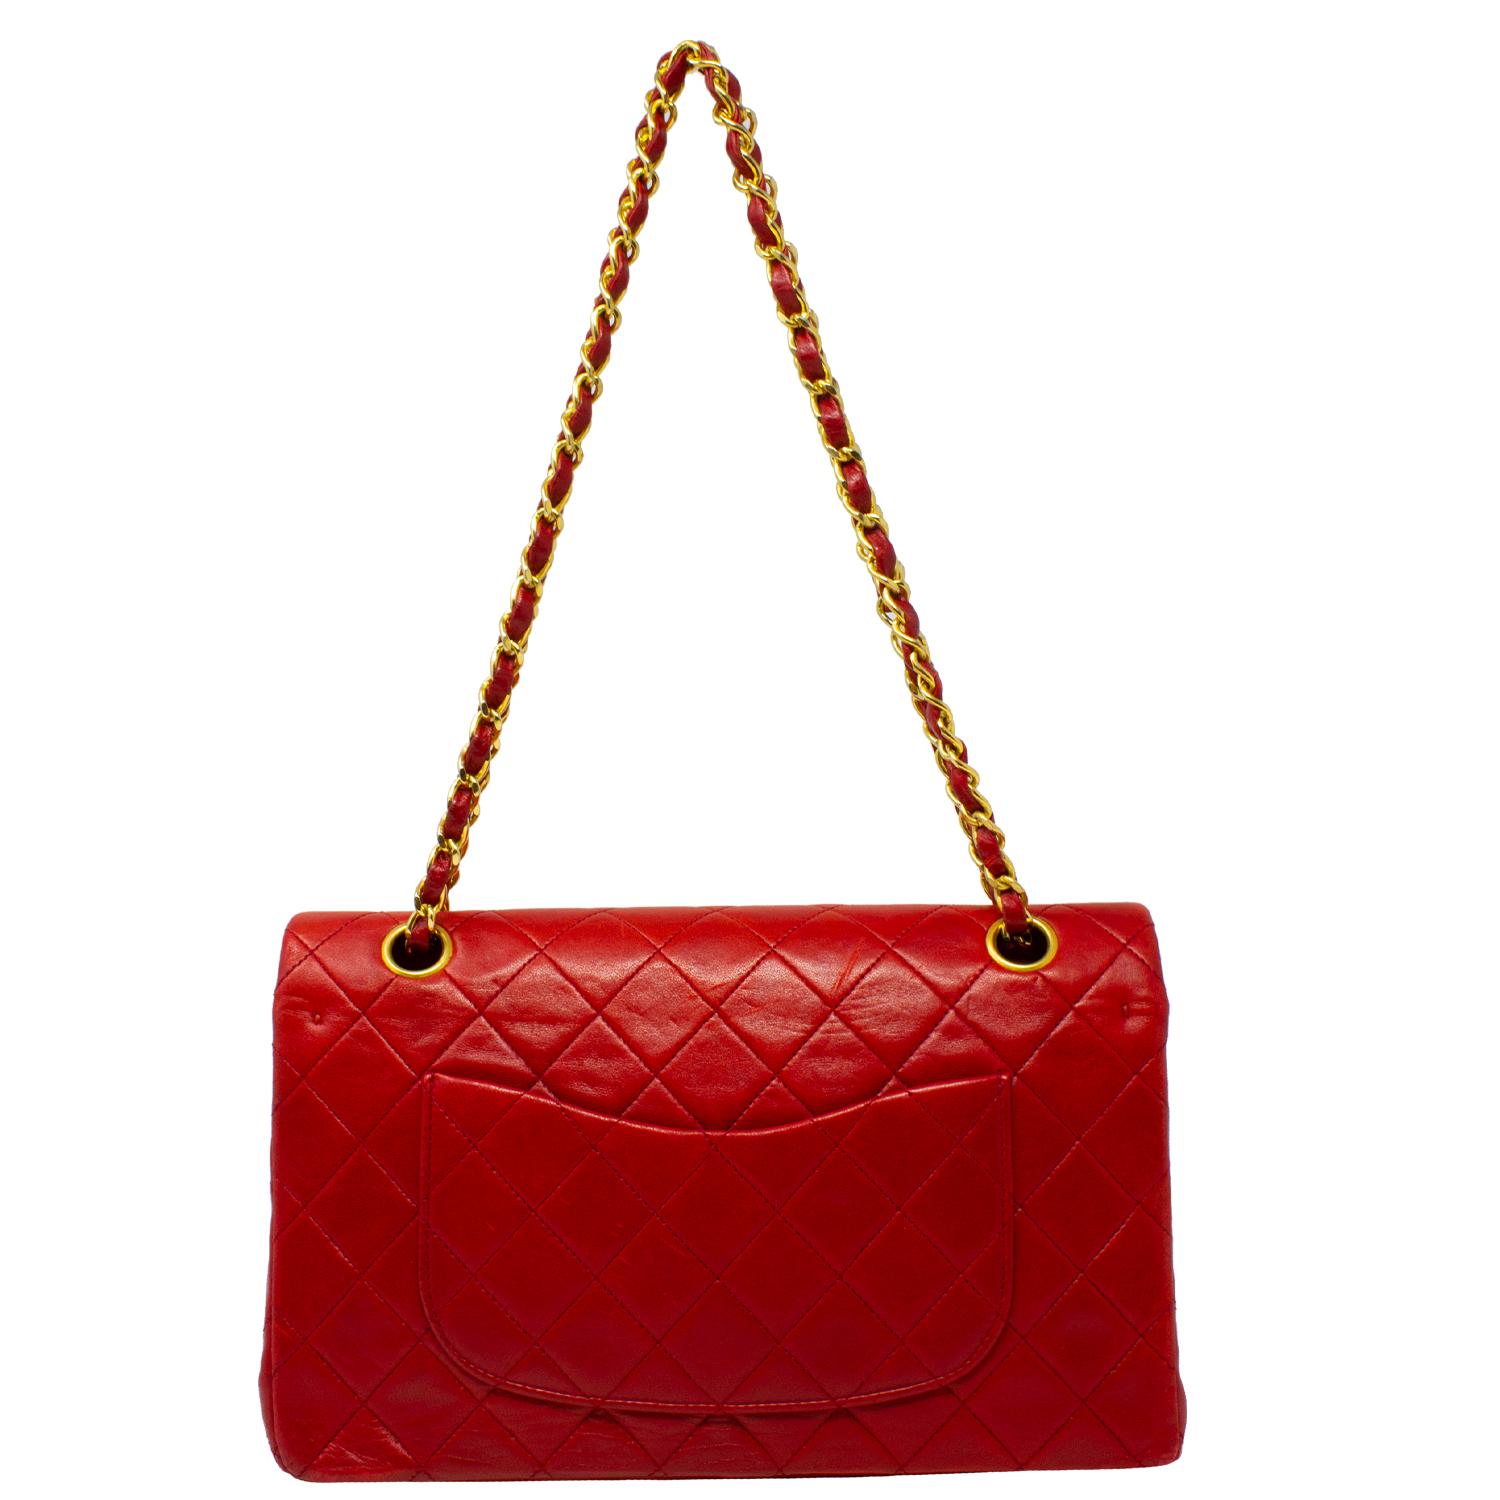 red chanel double flap bag